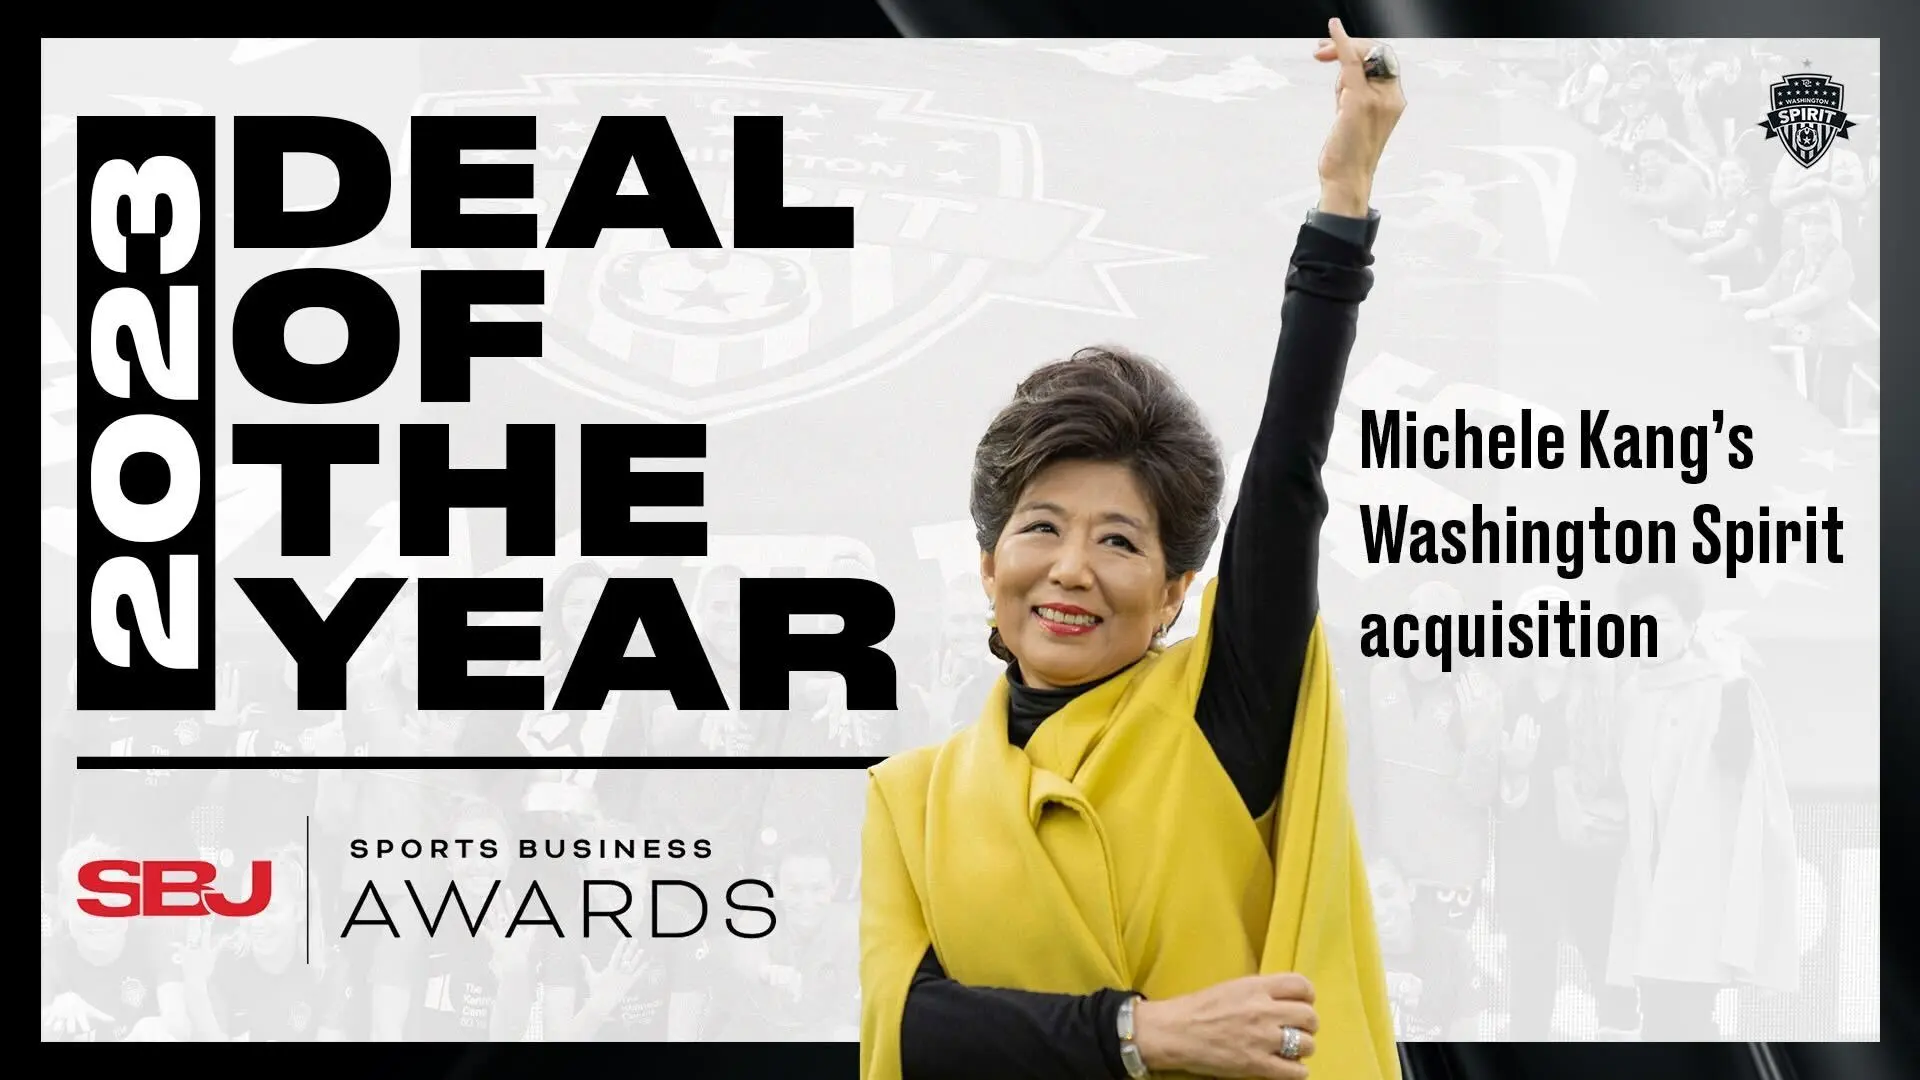 Spirit Majority Owner Michele Kang wins Sports Business Journal’s “Deal of the Year” Featured Image